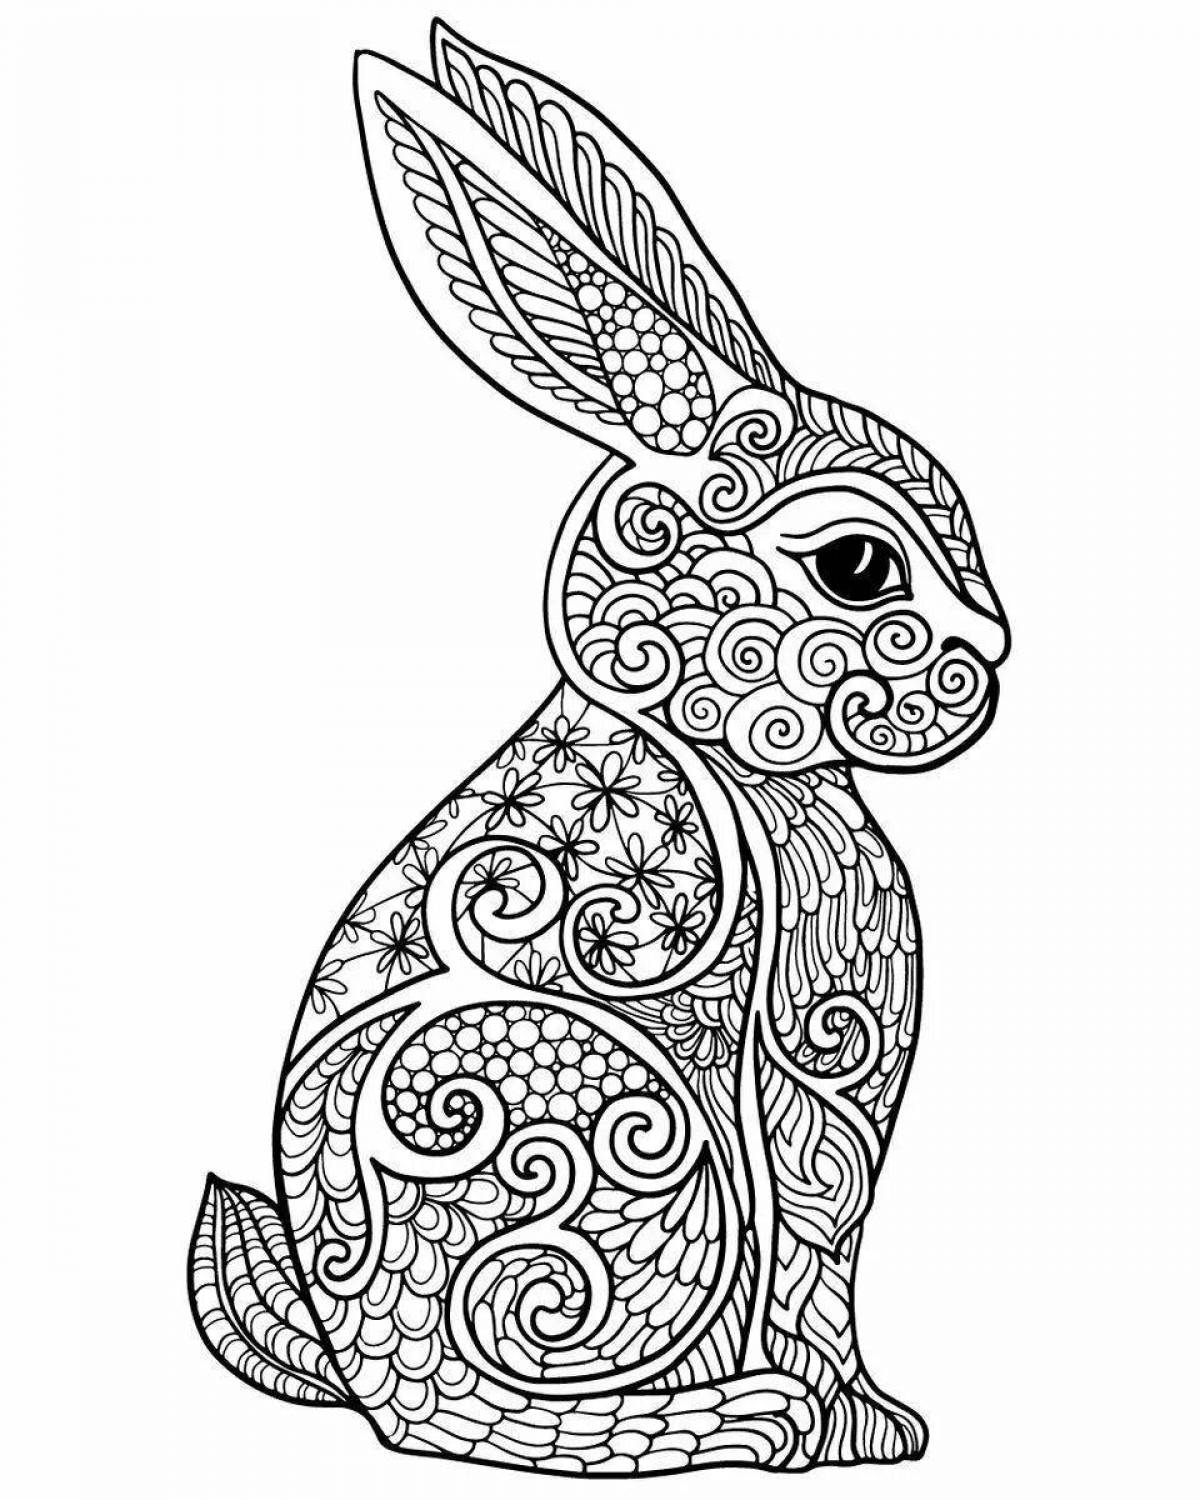 Magic anti-stress coloring book for girls animals